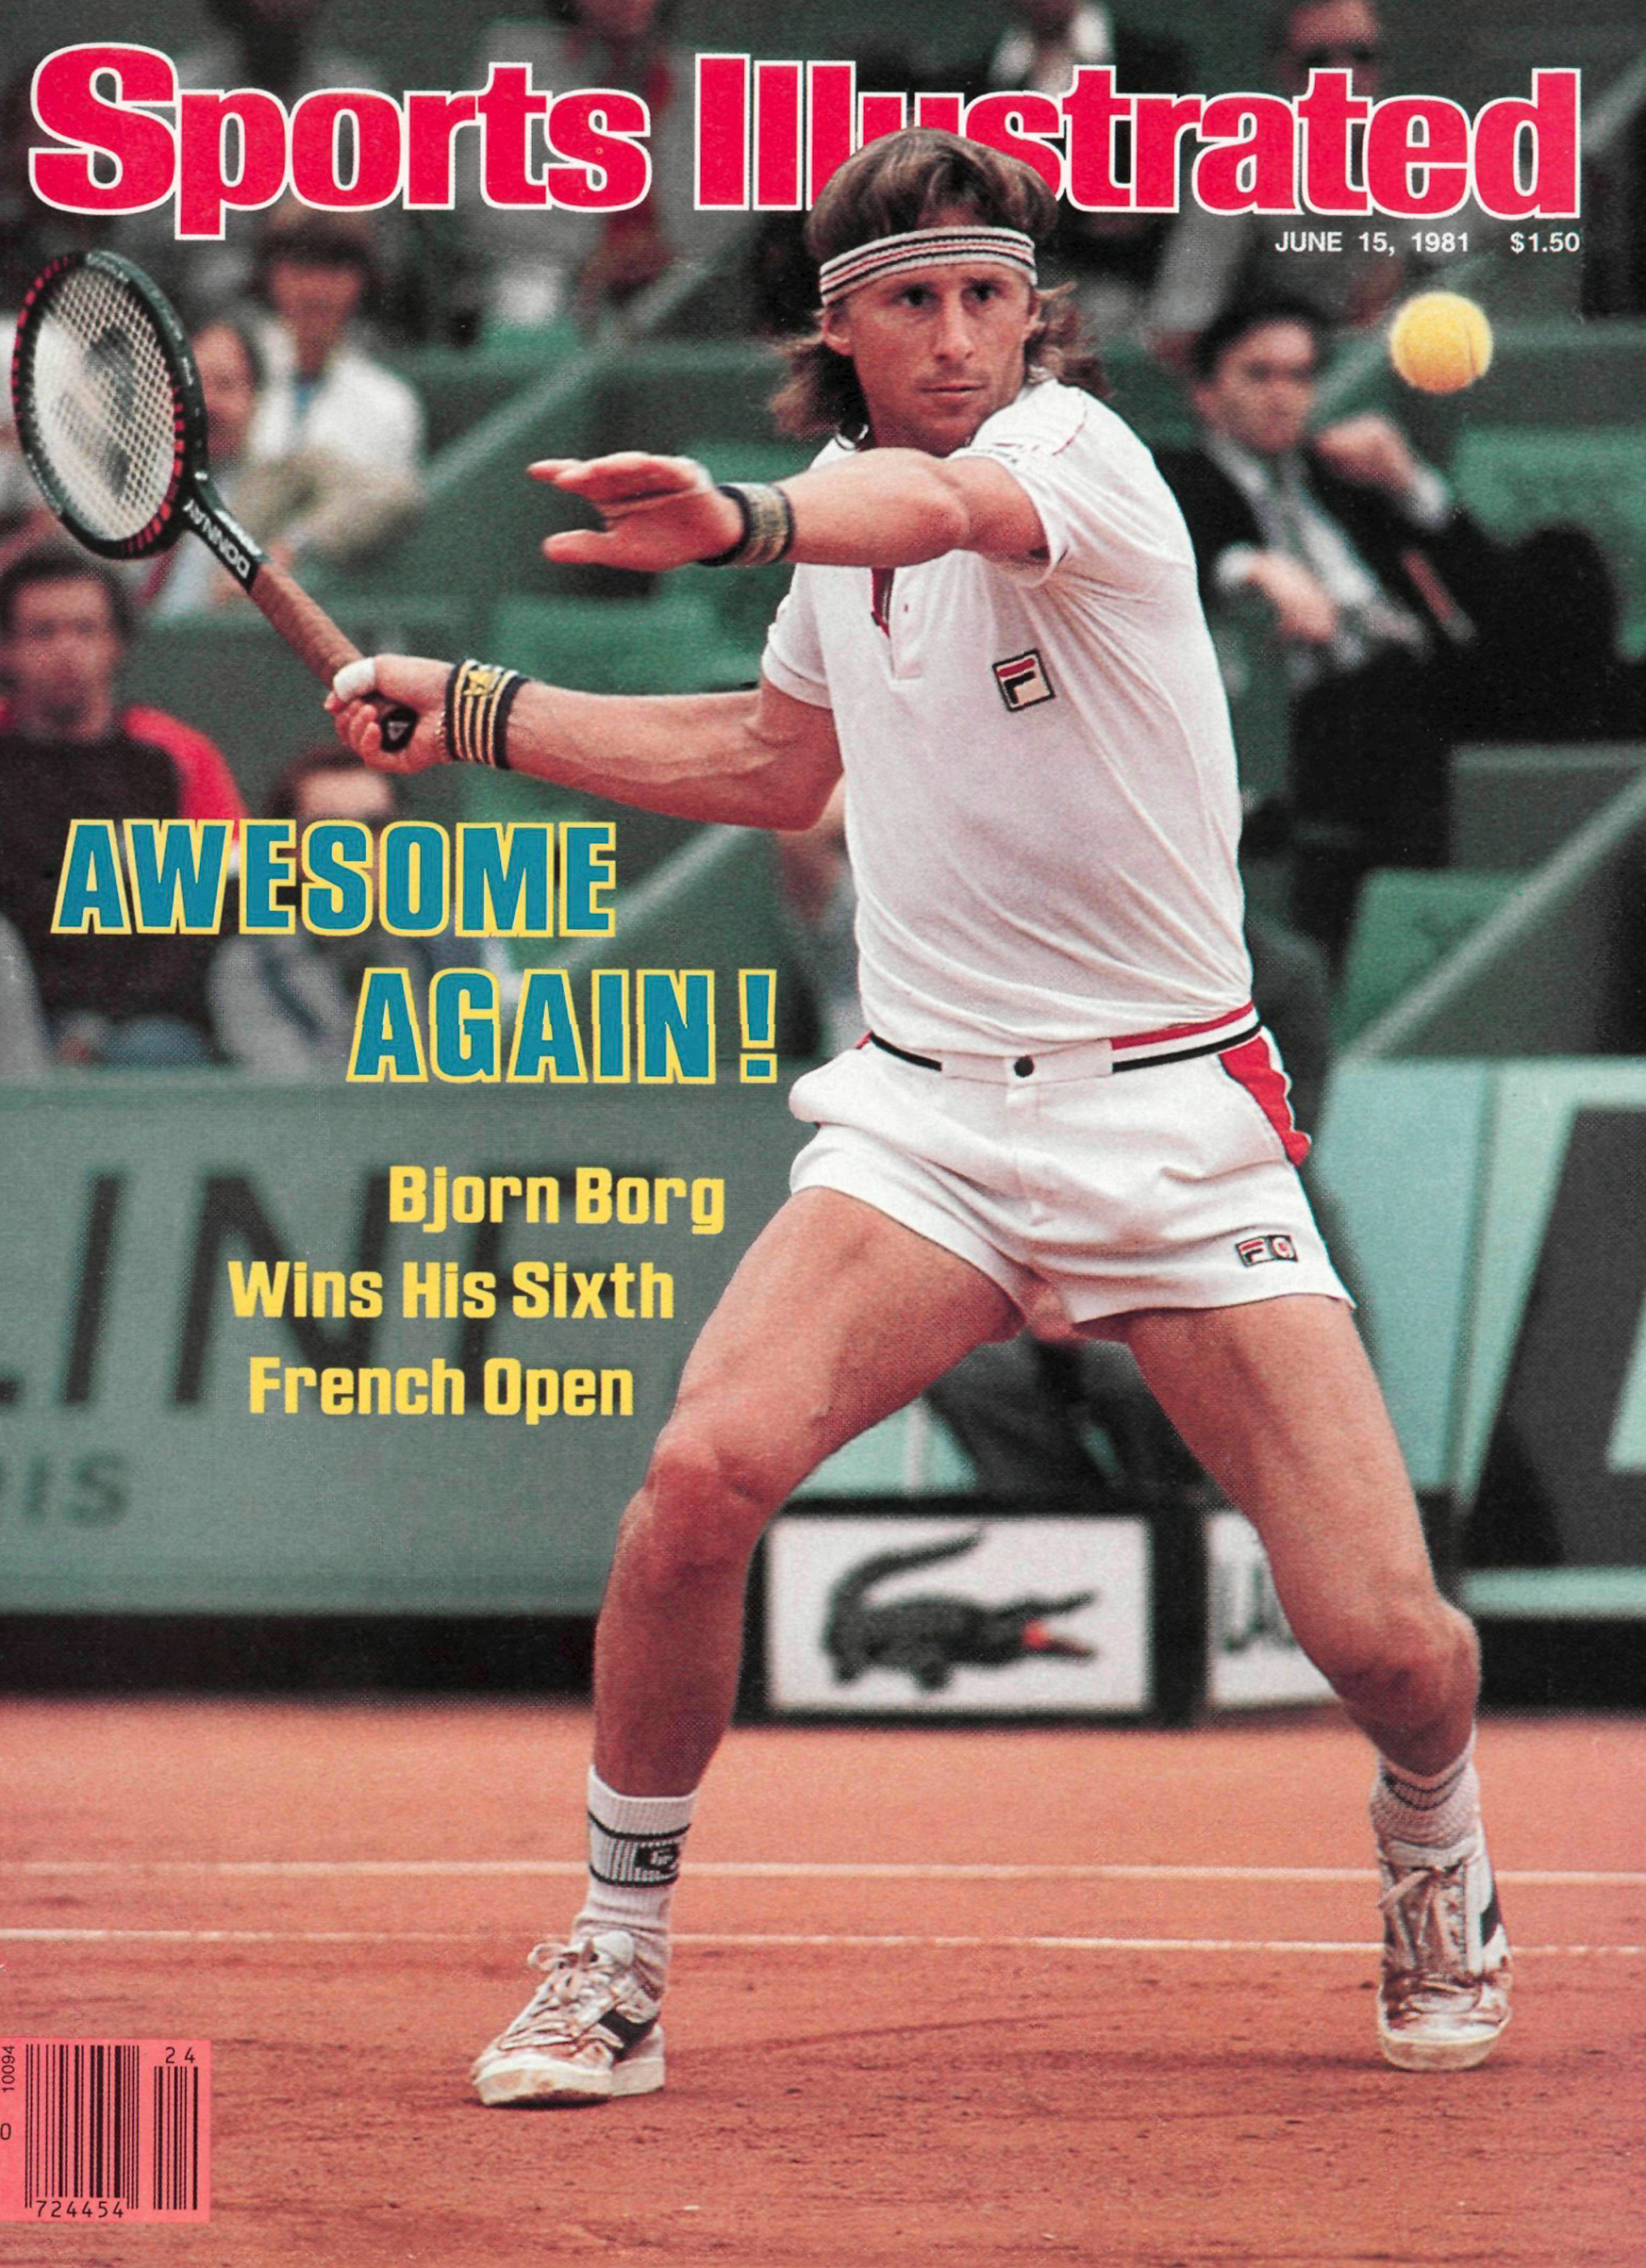 June 15, 1981 Sports Illustrated Cover. Sweden Bjorn Borg in action during match at Stade Roland Garros. Paris, France. Photo by Russ Adams.